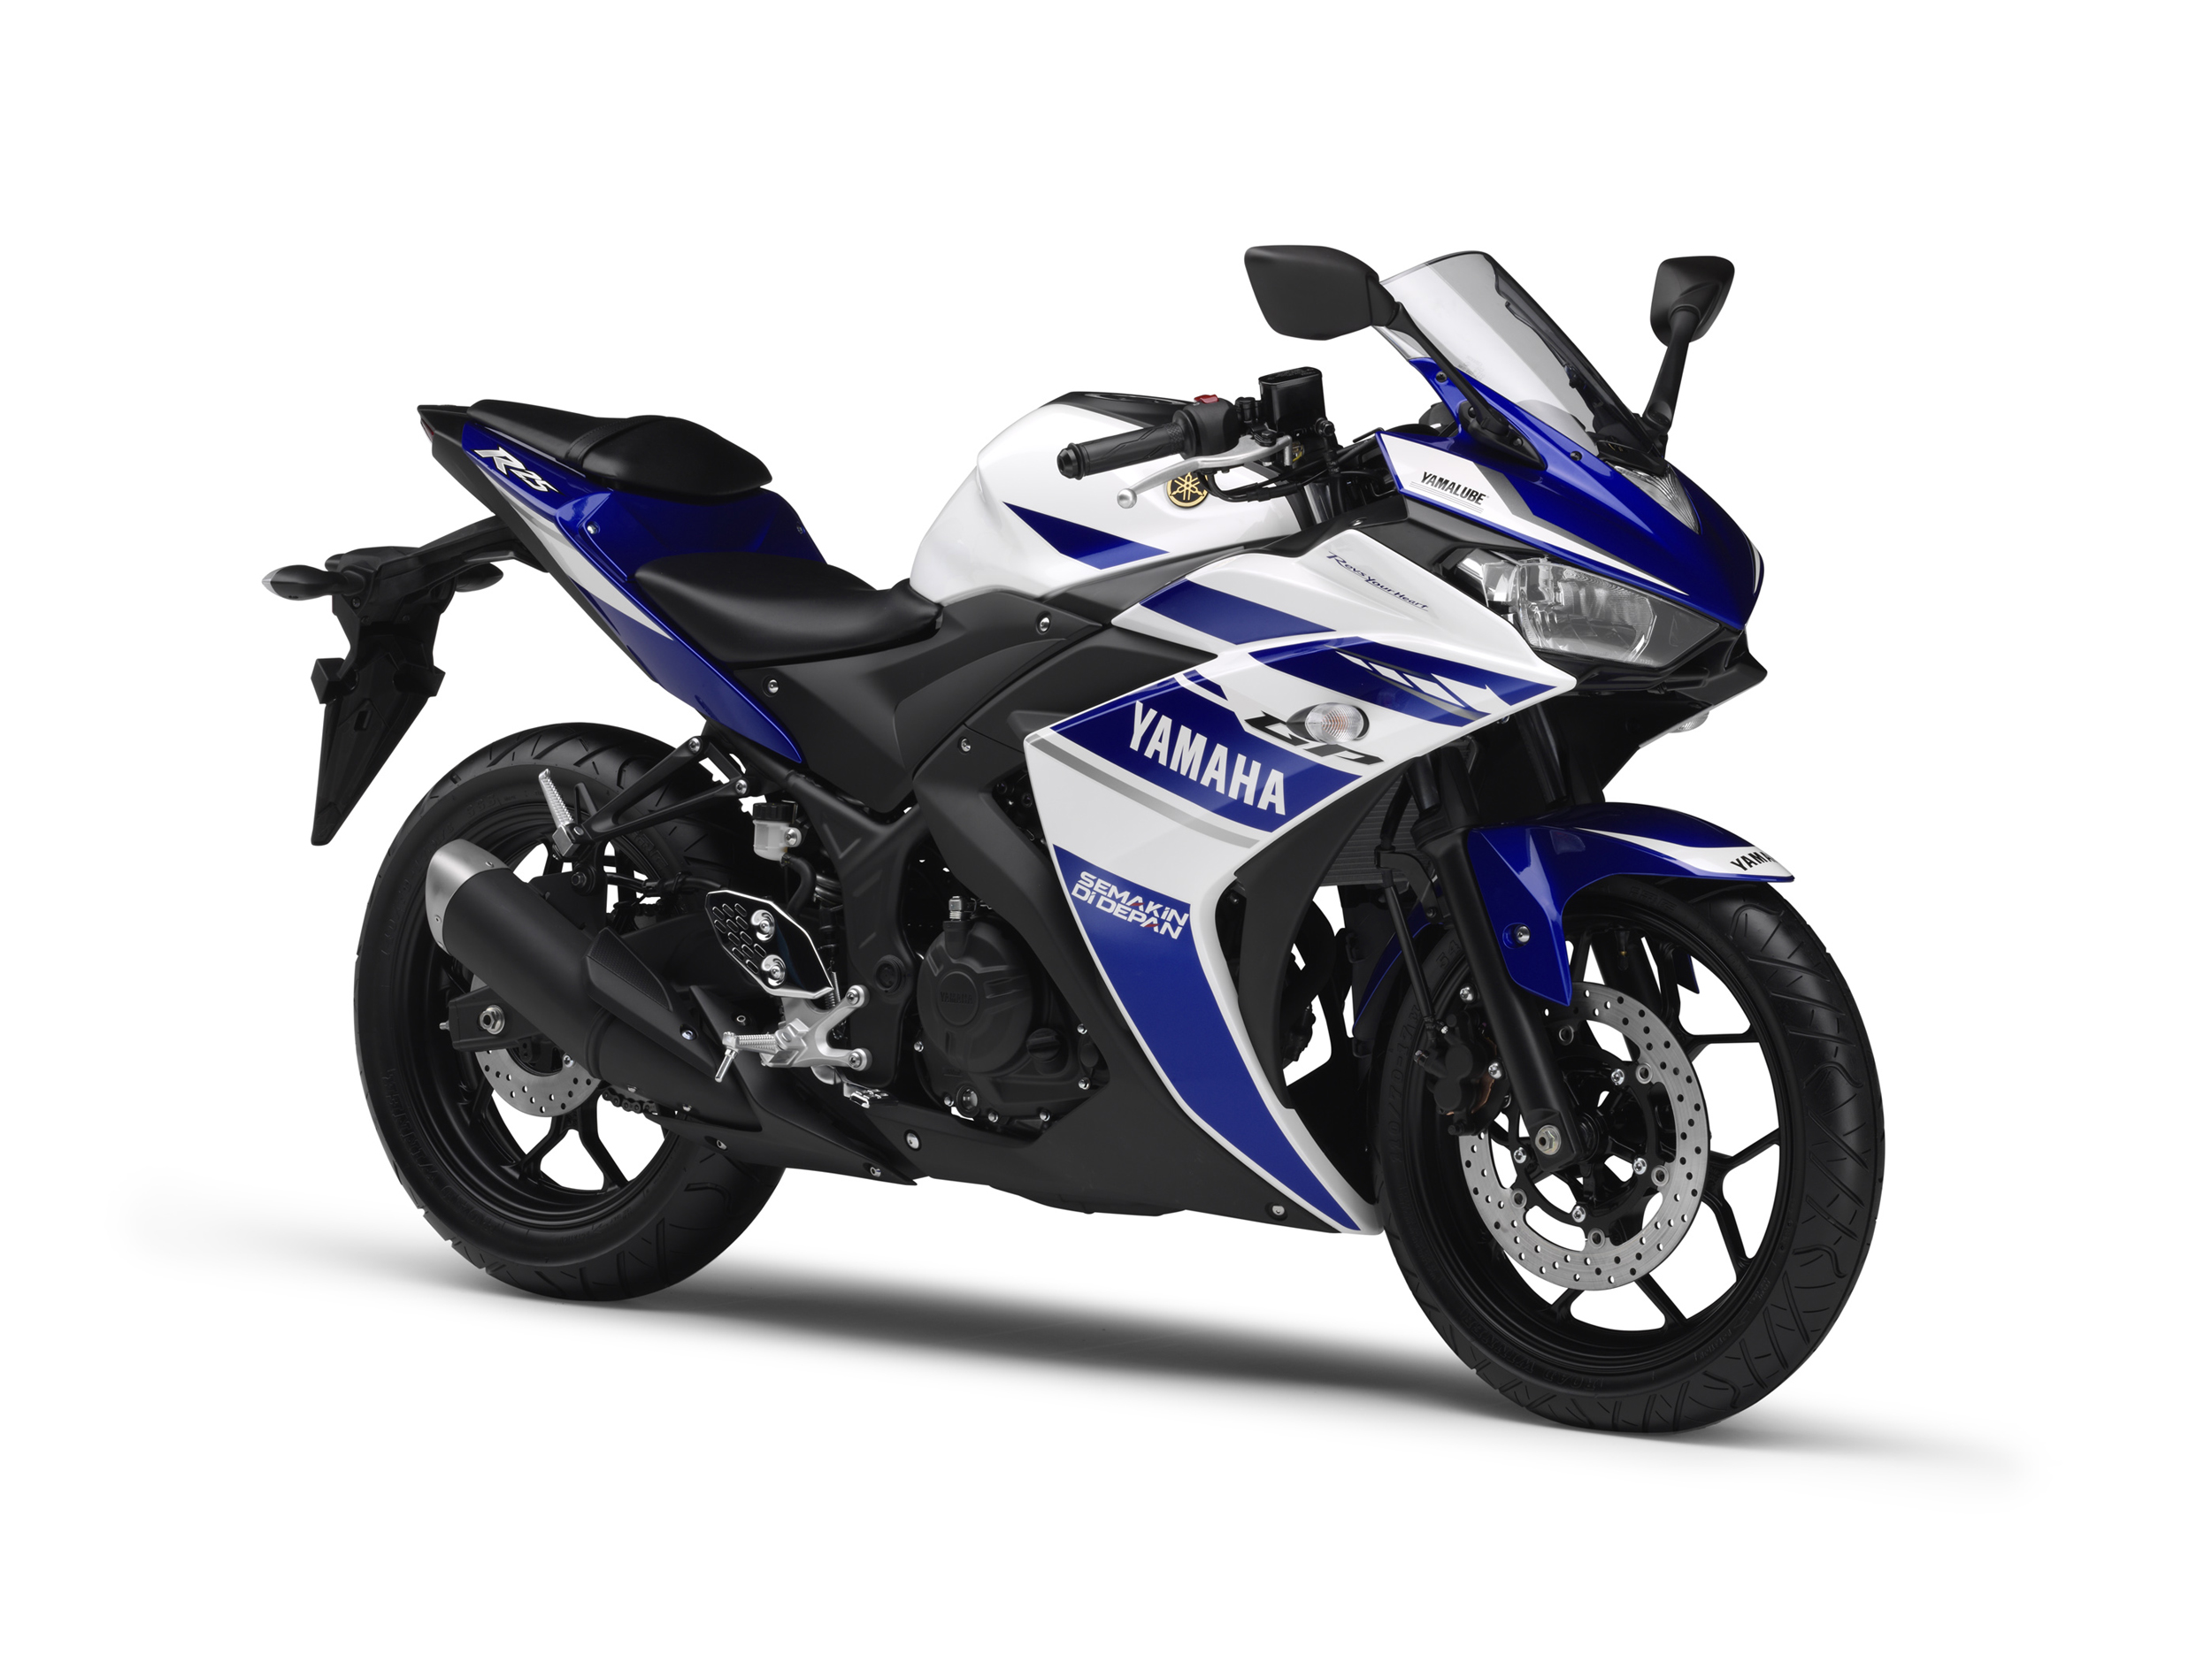 Yamaha R25 reaches almost 110mph